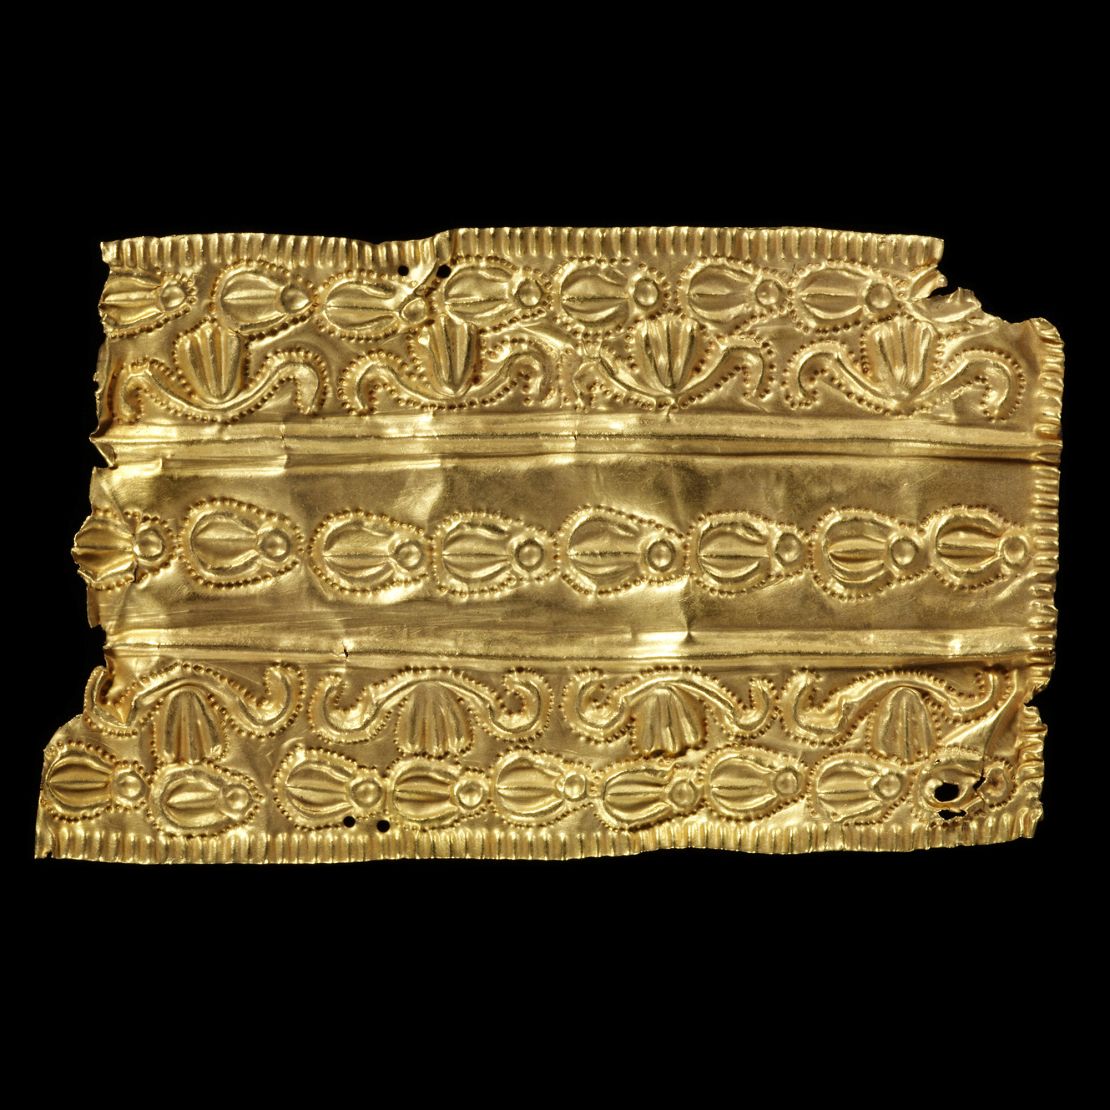 Ornament

Oblong repoussé gold ornament, with three bands of decoration, Asante, Ghana, 19th century © Victoria and Albert Museum, London.jpg

Unknown
Ghana
before 1874
Gold repoussÈ